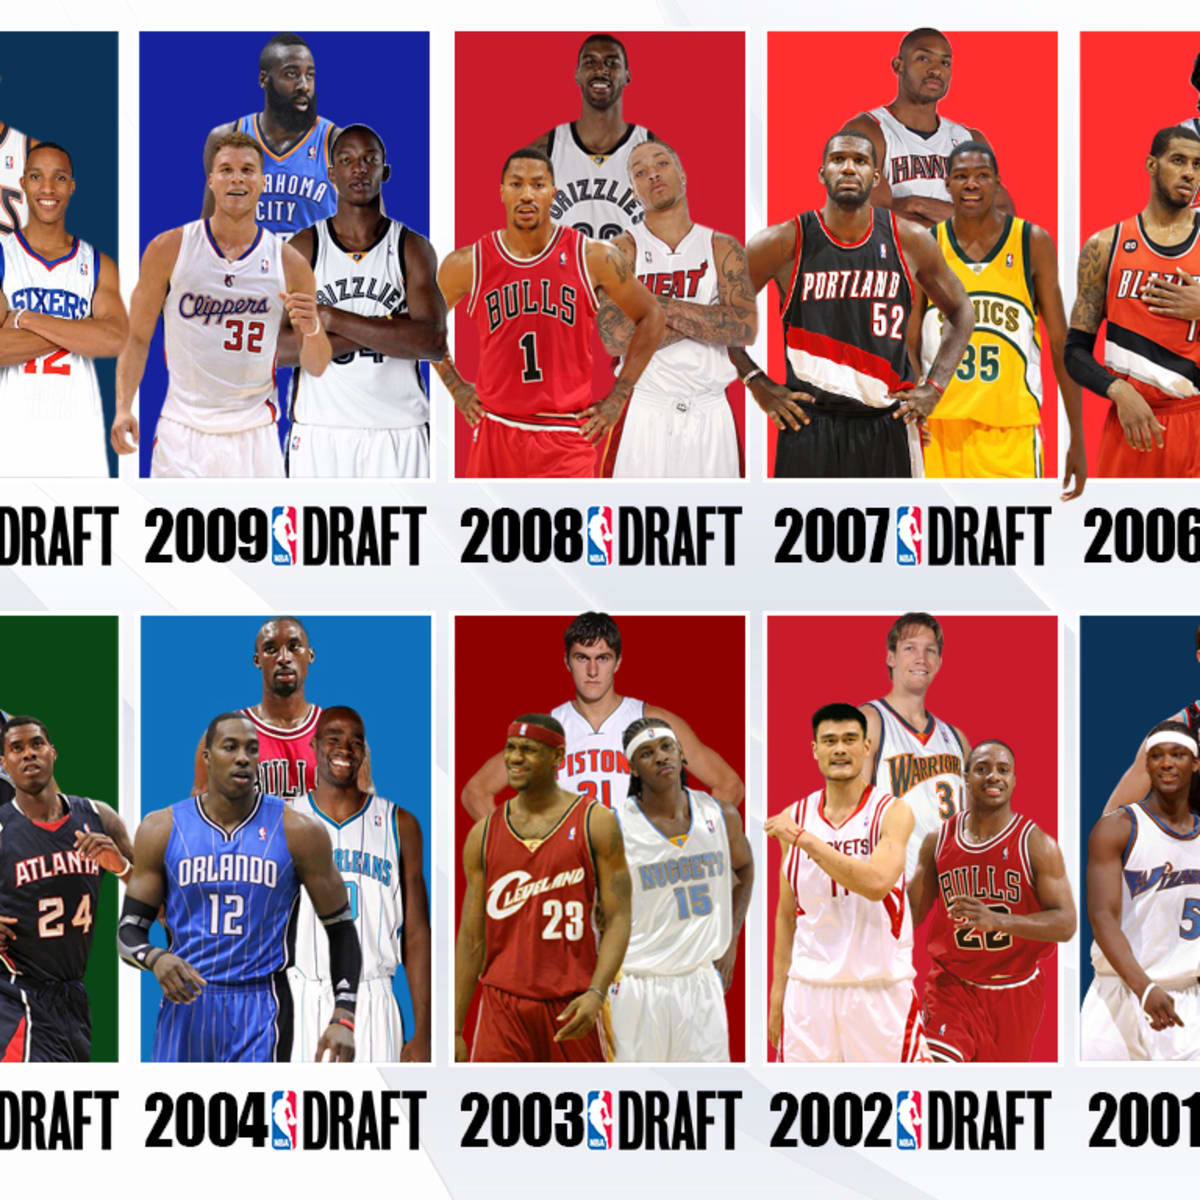 Basketball Forever - Only three players from the 2003 NBA Draft